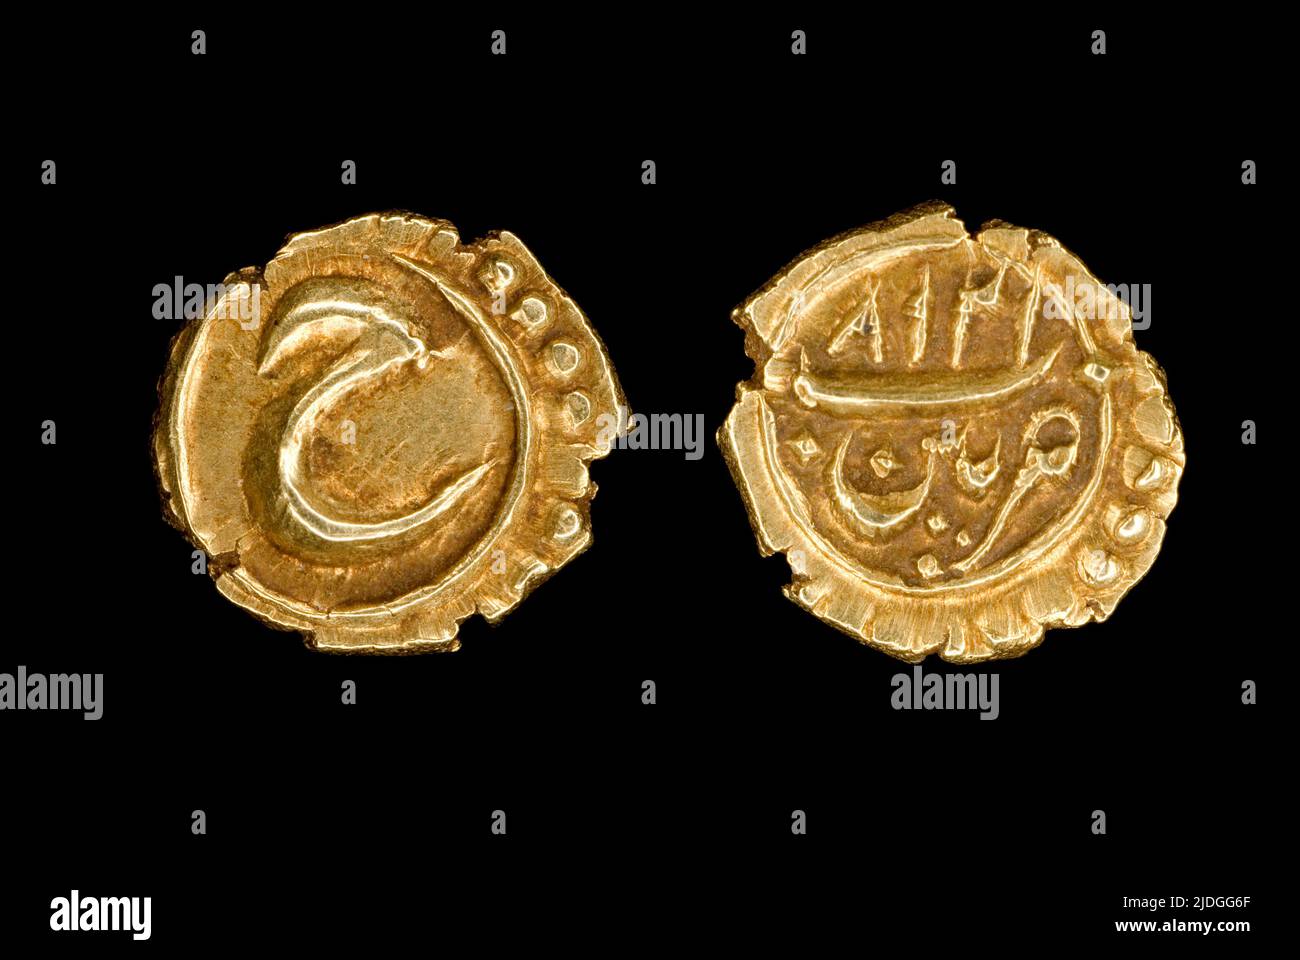 Gold Fanam coin of  Tipu Sultan Stock Photo